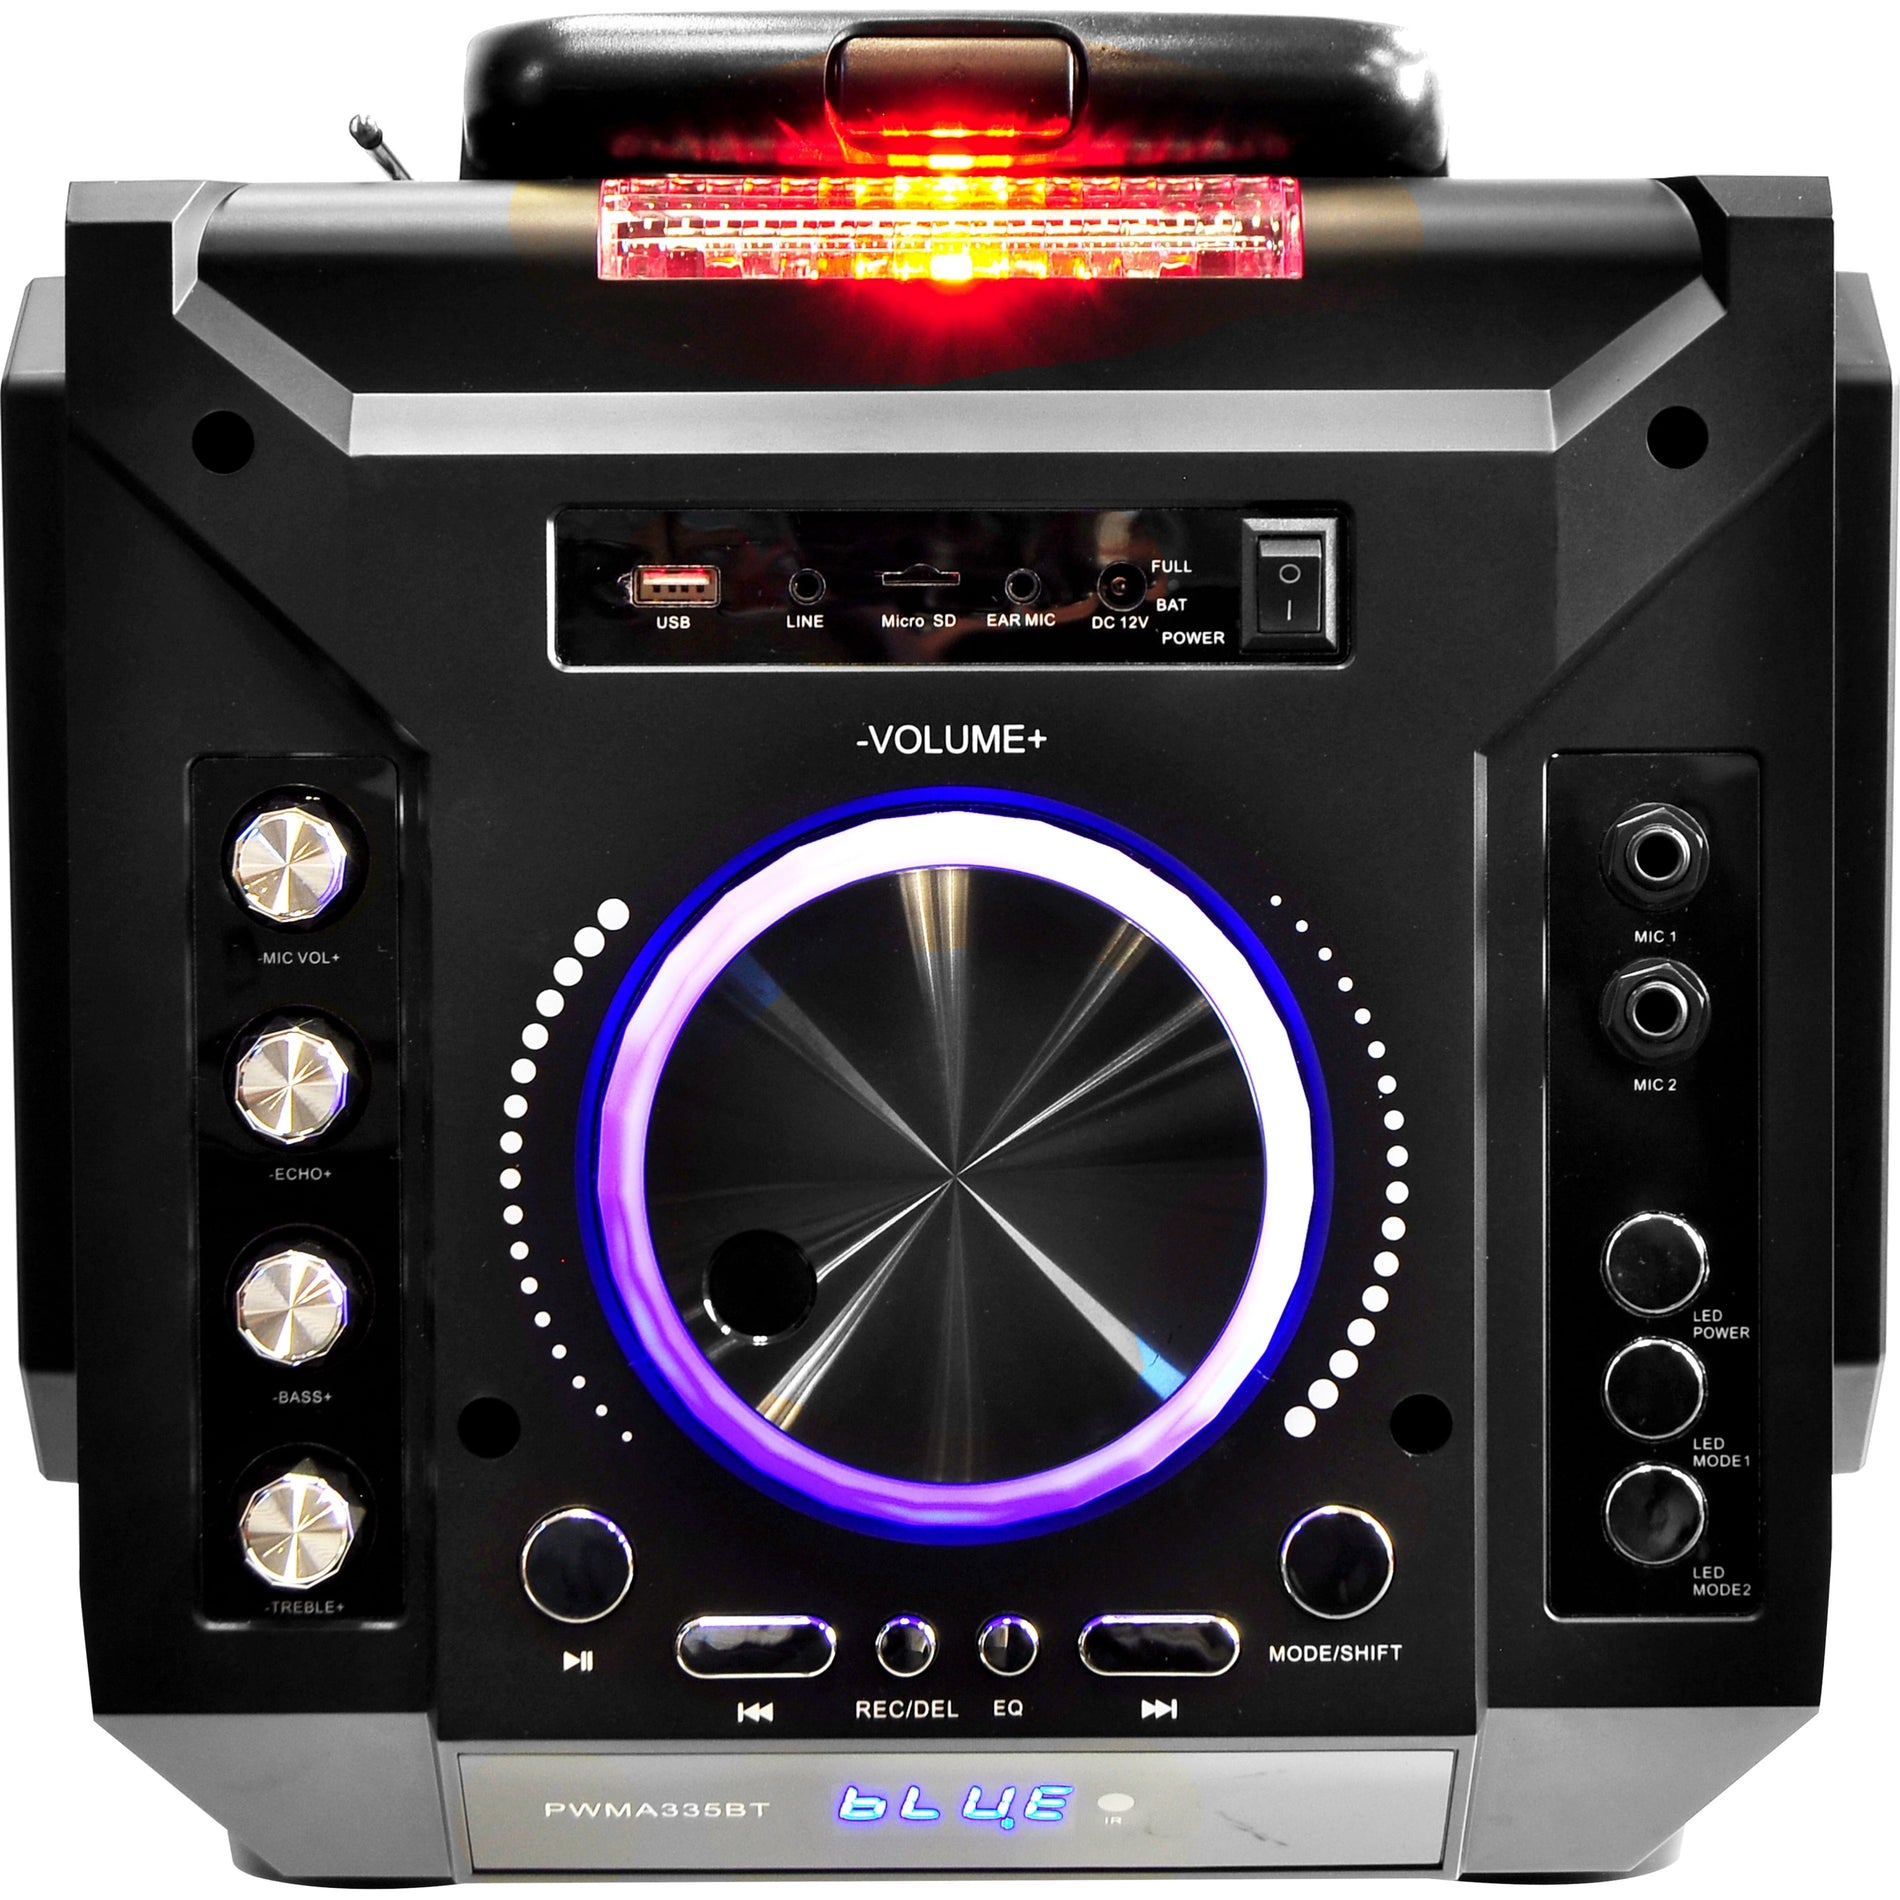 Pyle PWMA335BT Portable Bluetooth Karaoke Speaker System, 8'' Subwoofer, Wired Handheld Microphone